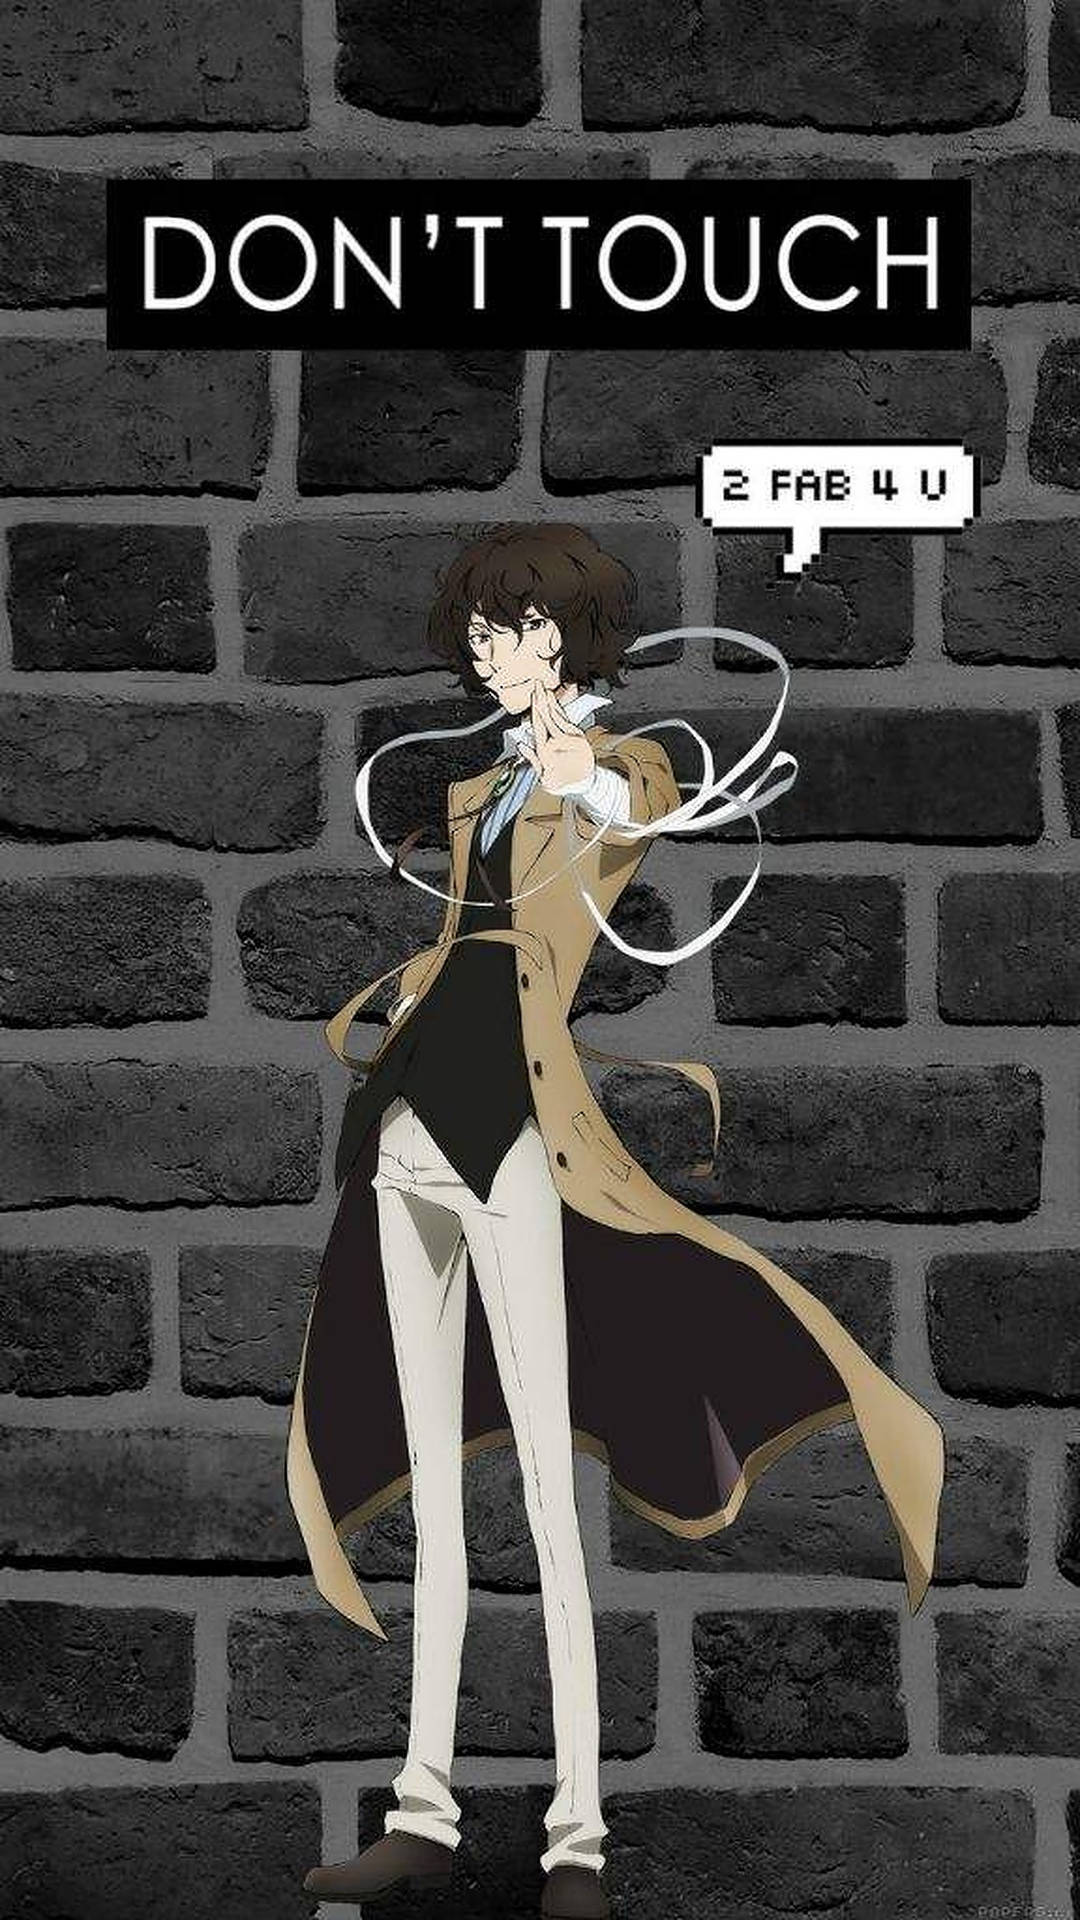 Animated Character Dazai with a stern warning 